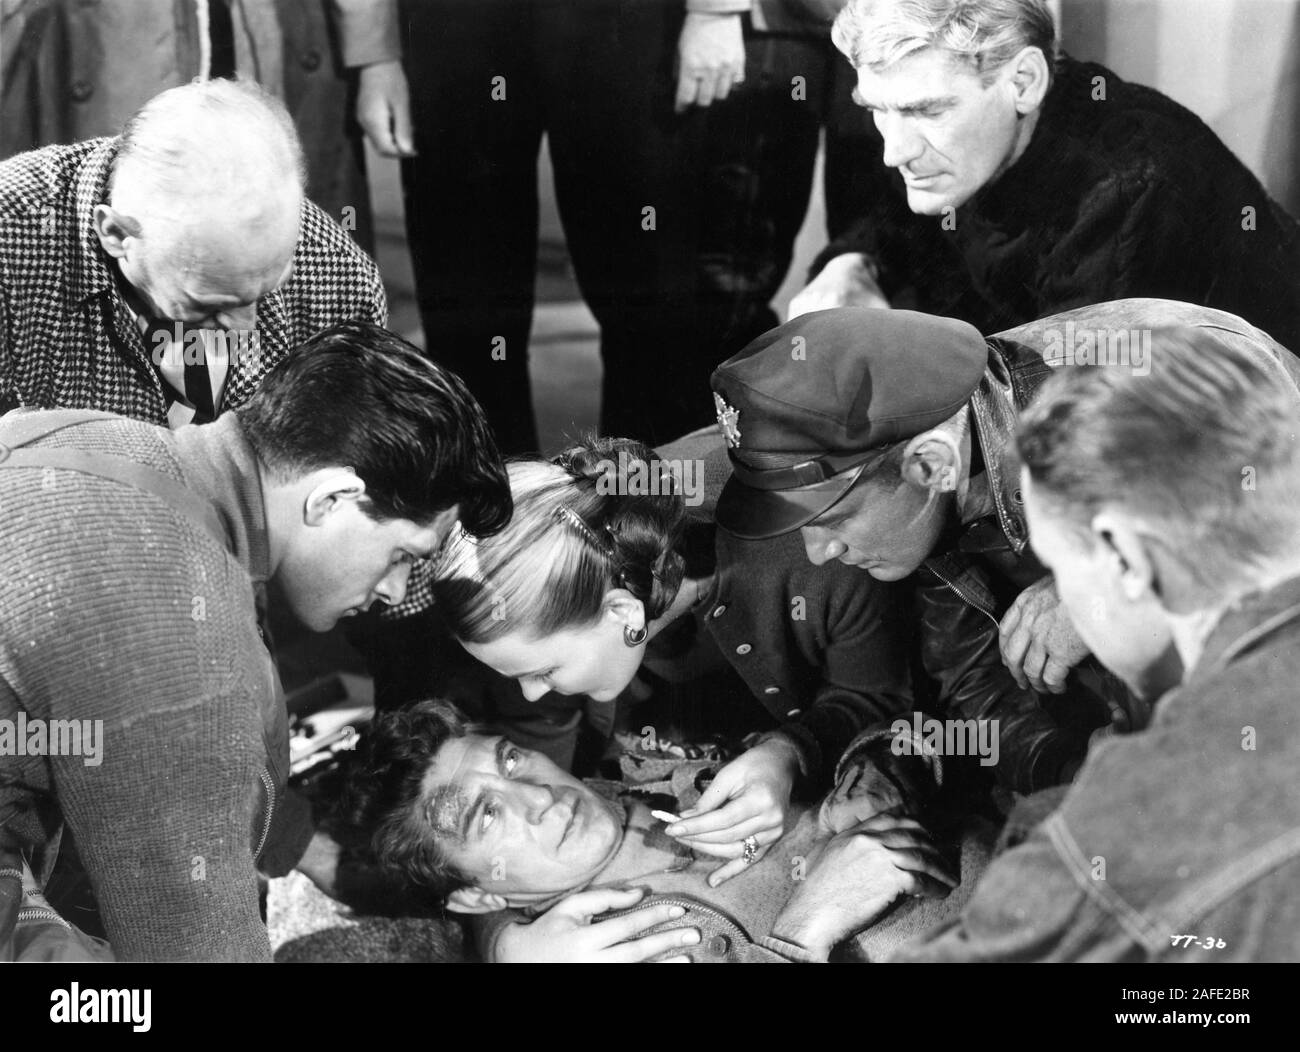 DEWEY MARTIN KENNETH TOBEY and JOHN DIERKES in THE THING From Another World 1951 directors Christian Nyby and Howard Hawks screenplay Charles Lederer producer Howard Hawks Winchester Pictures Corporation / RKO Radio Pictures Stock Photo